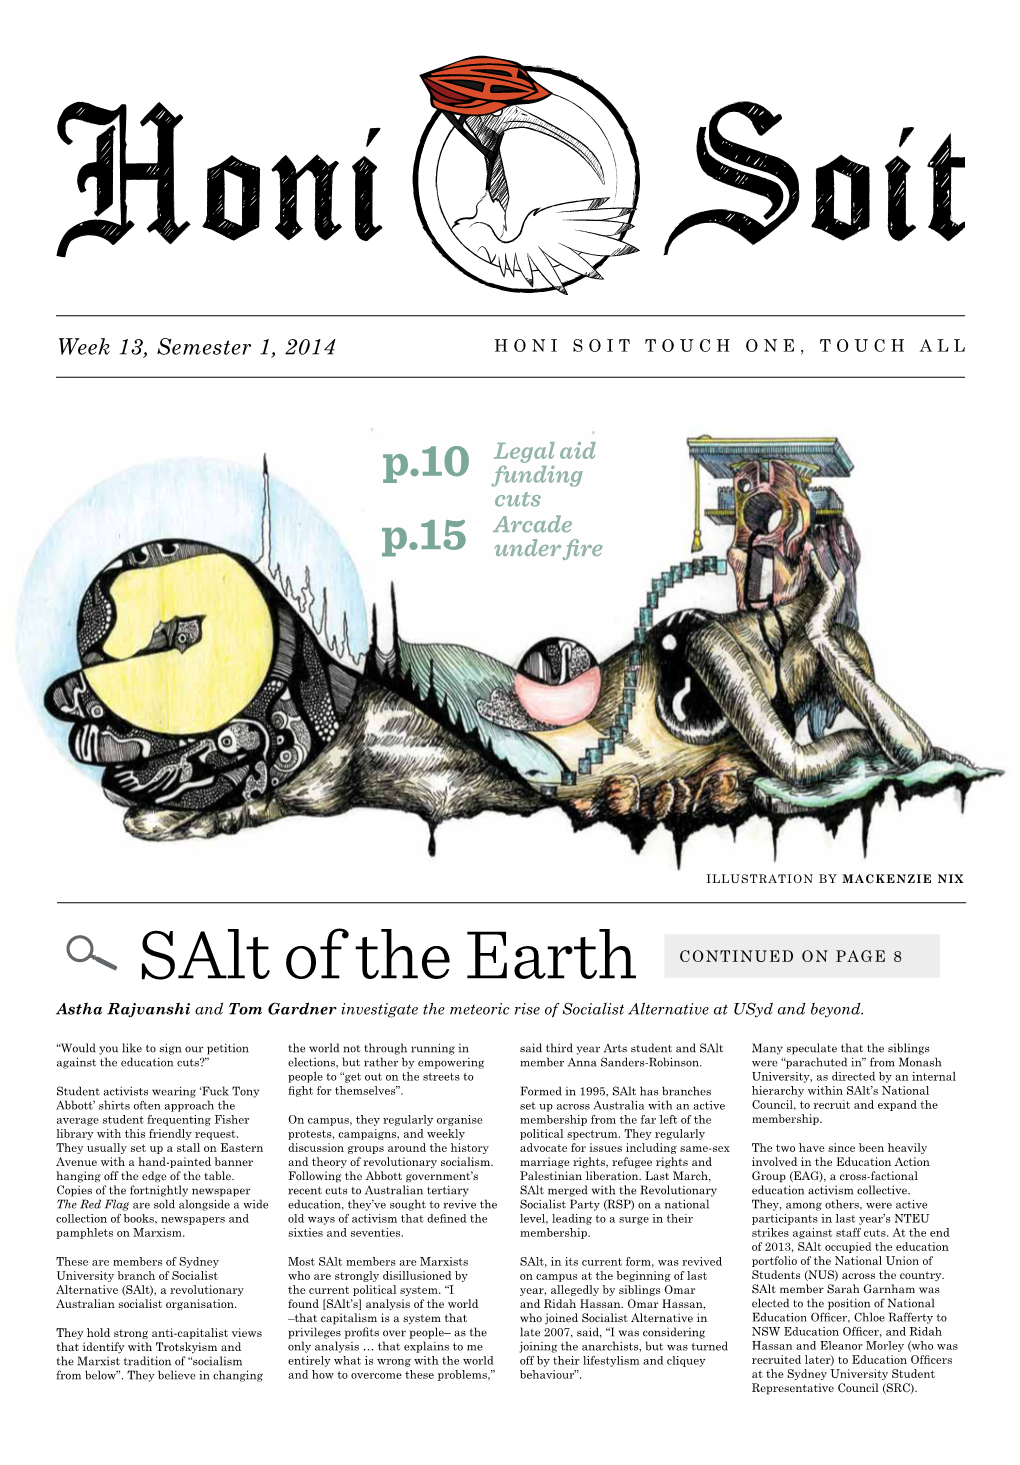 Salt of the Earth Continued on Page 8 Astha Rajvanshi and Tom Gardner Investigate the Meteoric Rise of Socialist Alternative at Usyd and Beyond